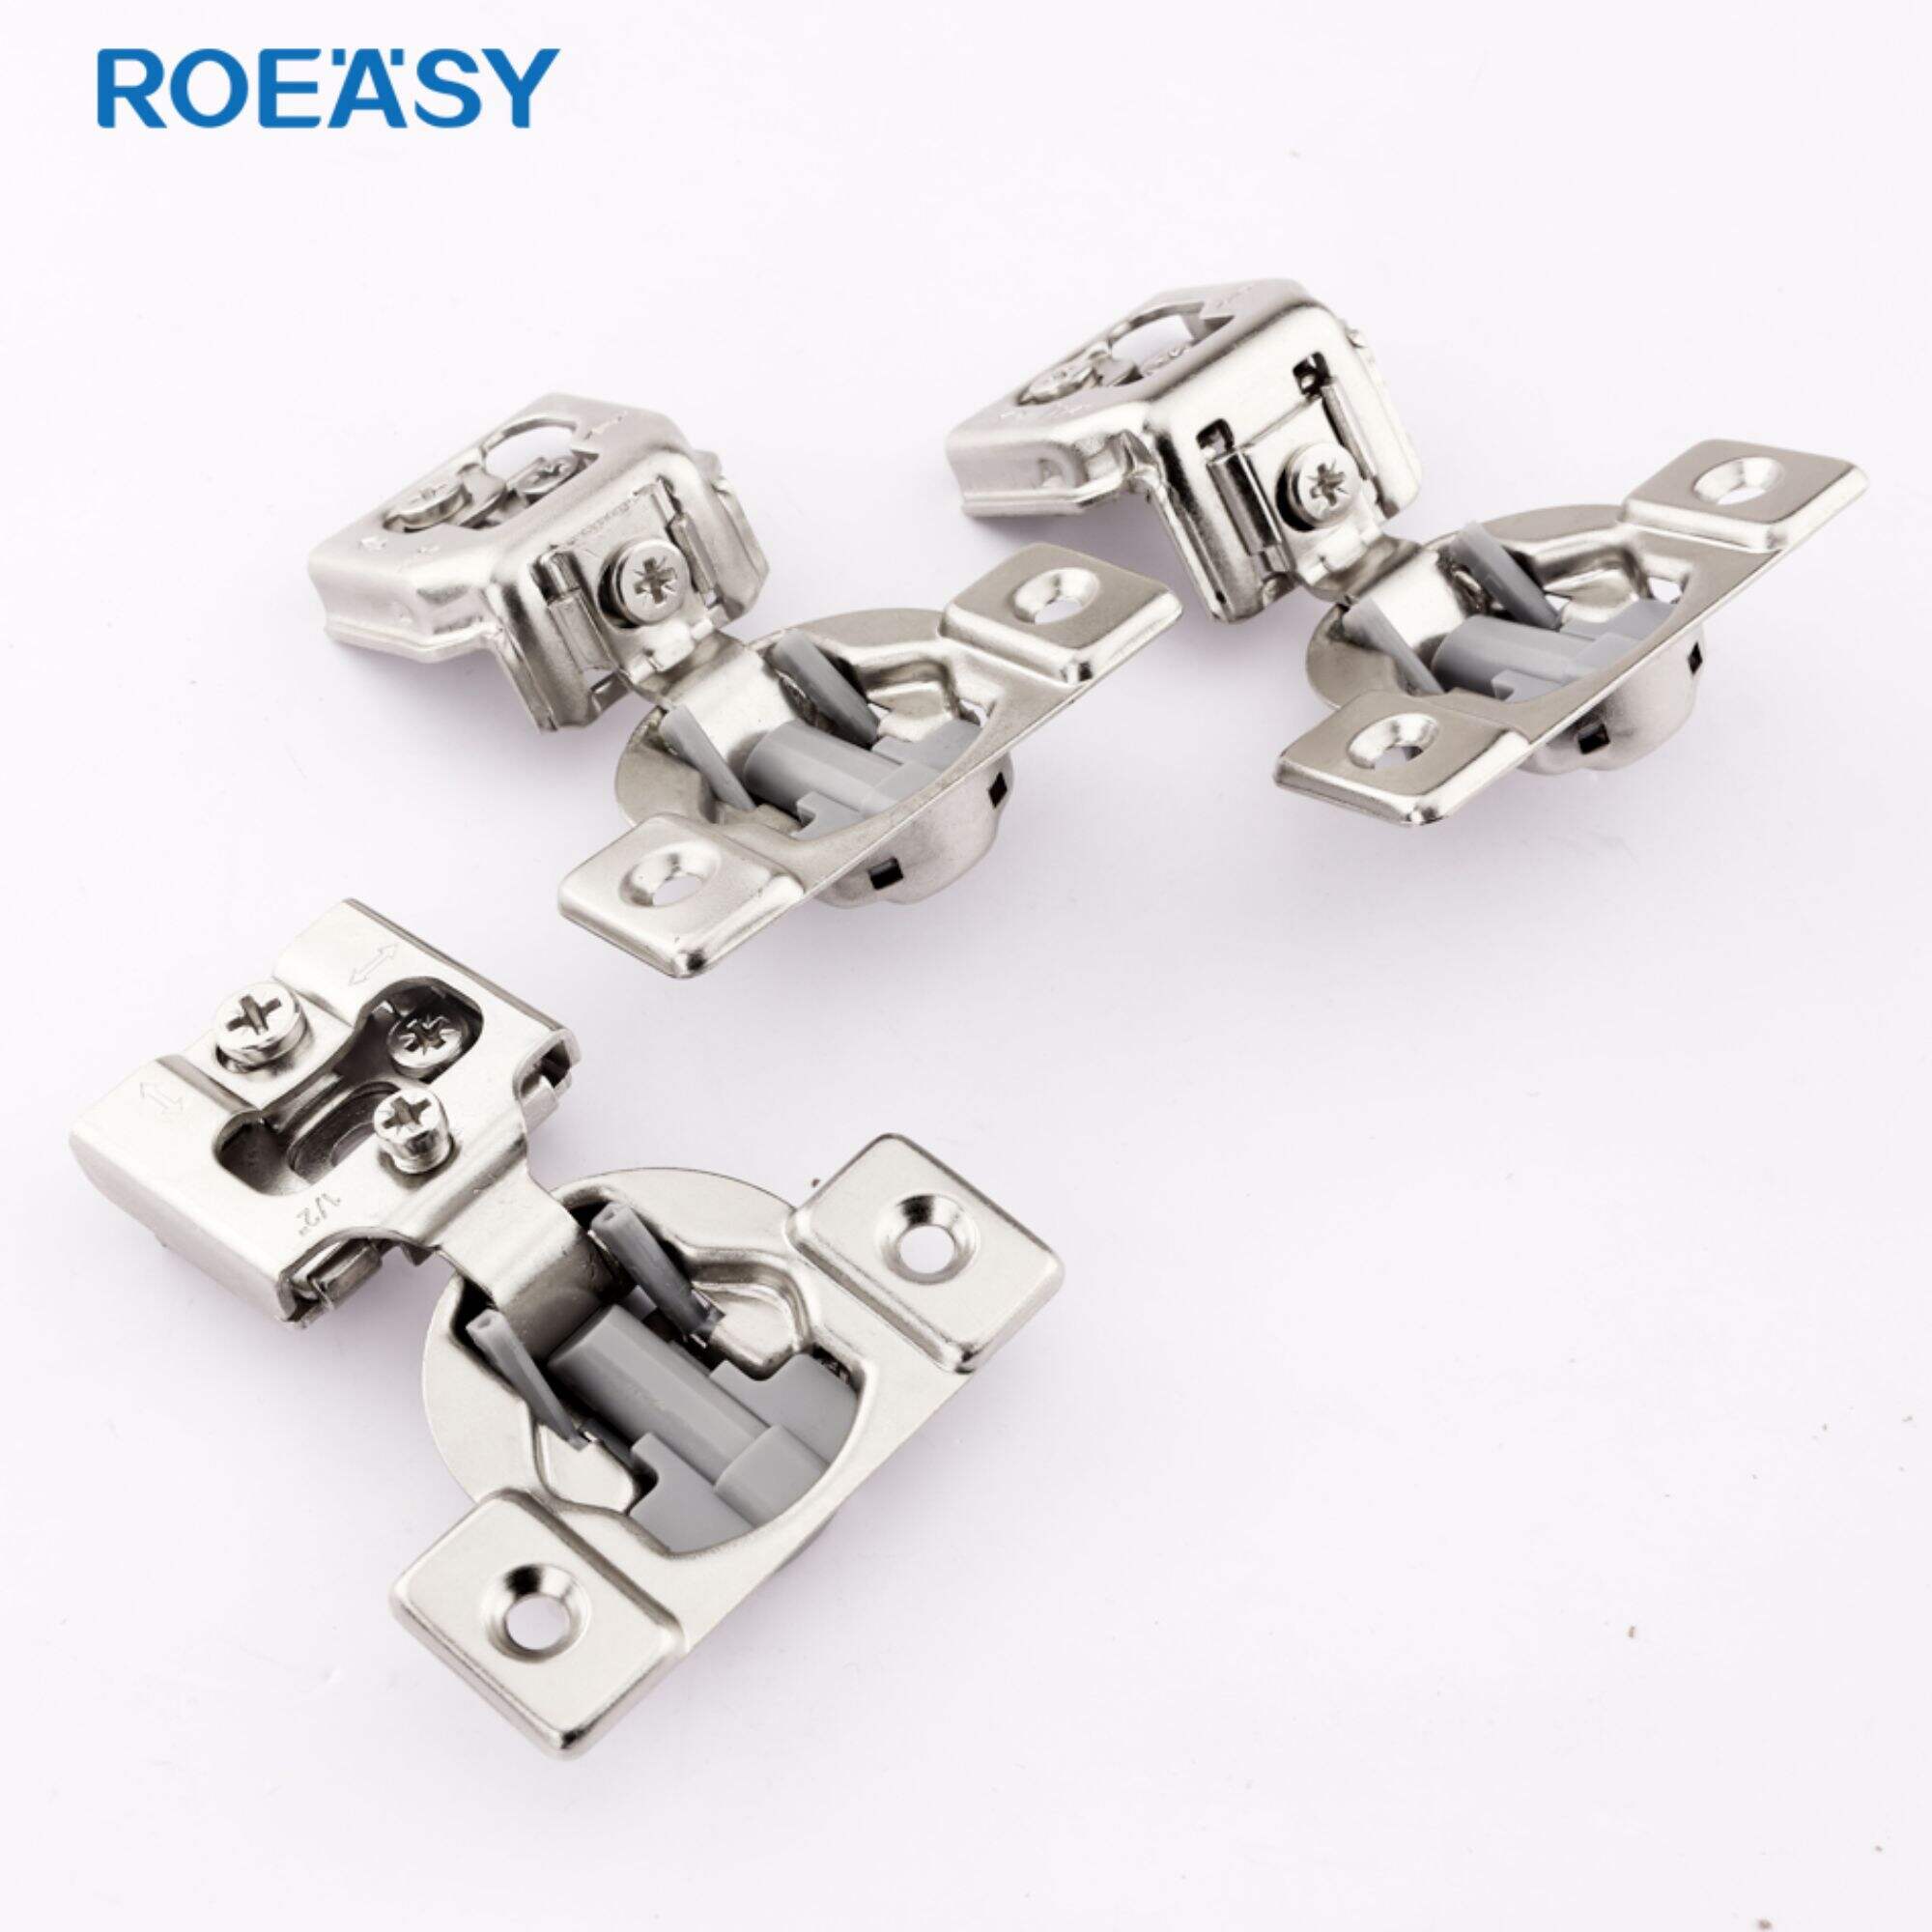 Roeasy CH-321 35 mm Cup 105 degree 1-1/4 Inch Short Arm American Type Cabinet Mini Hinge